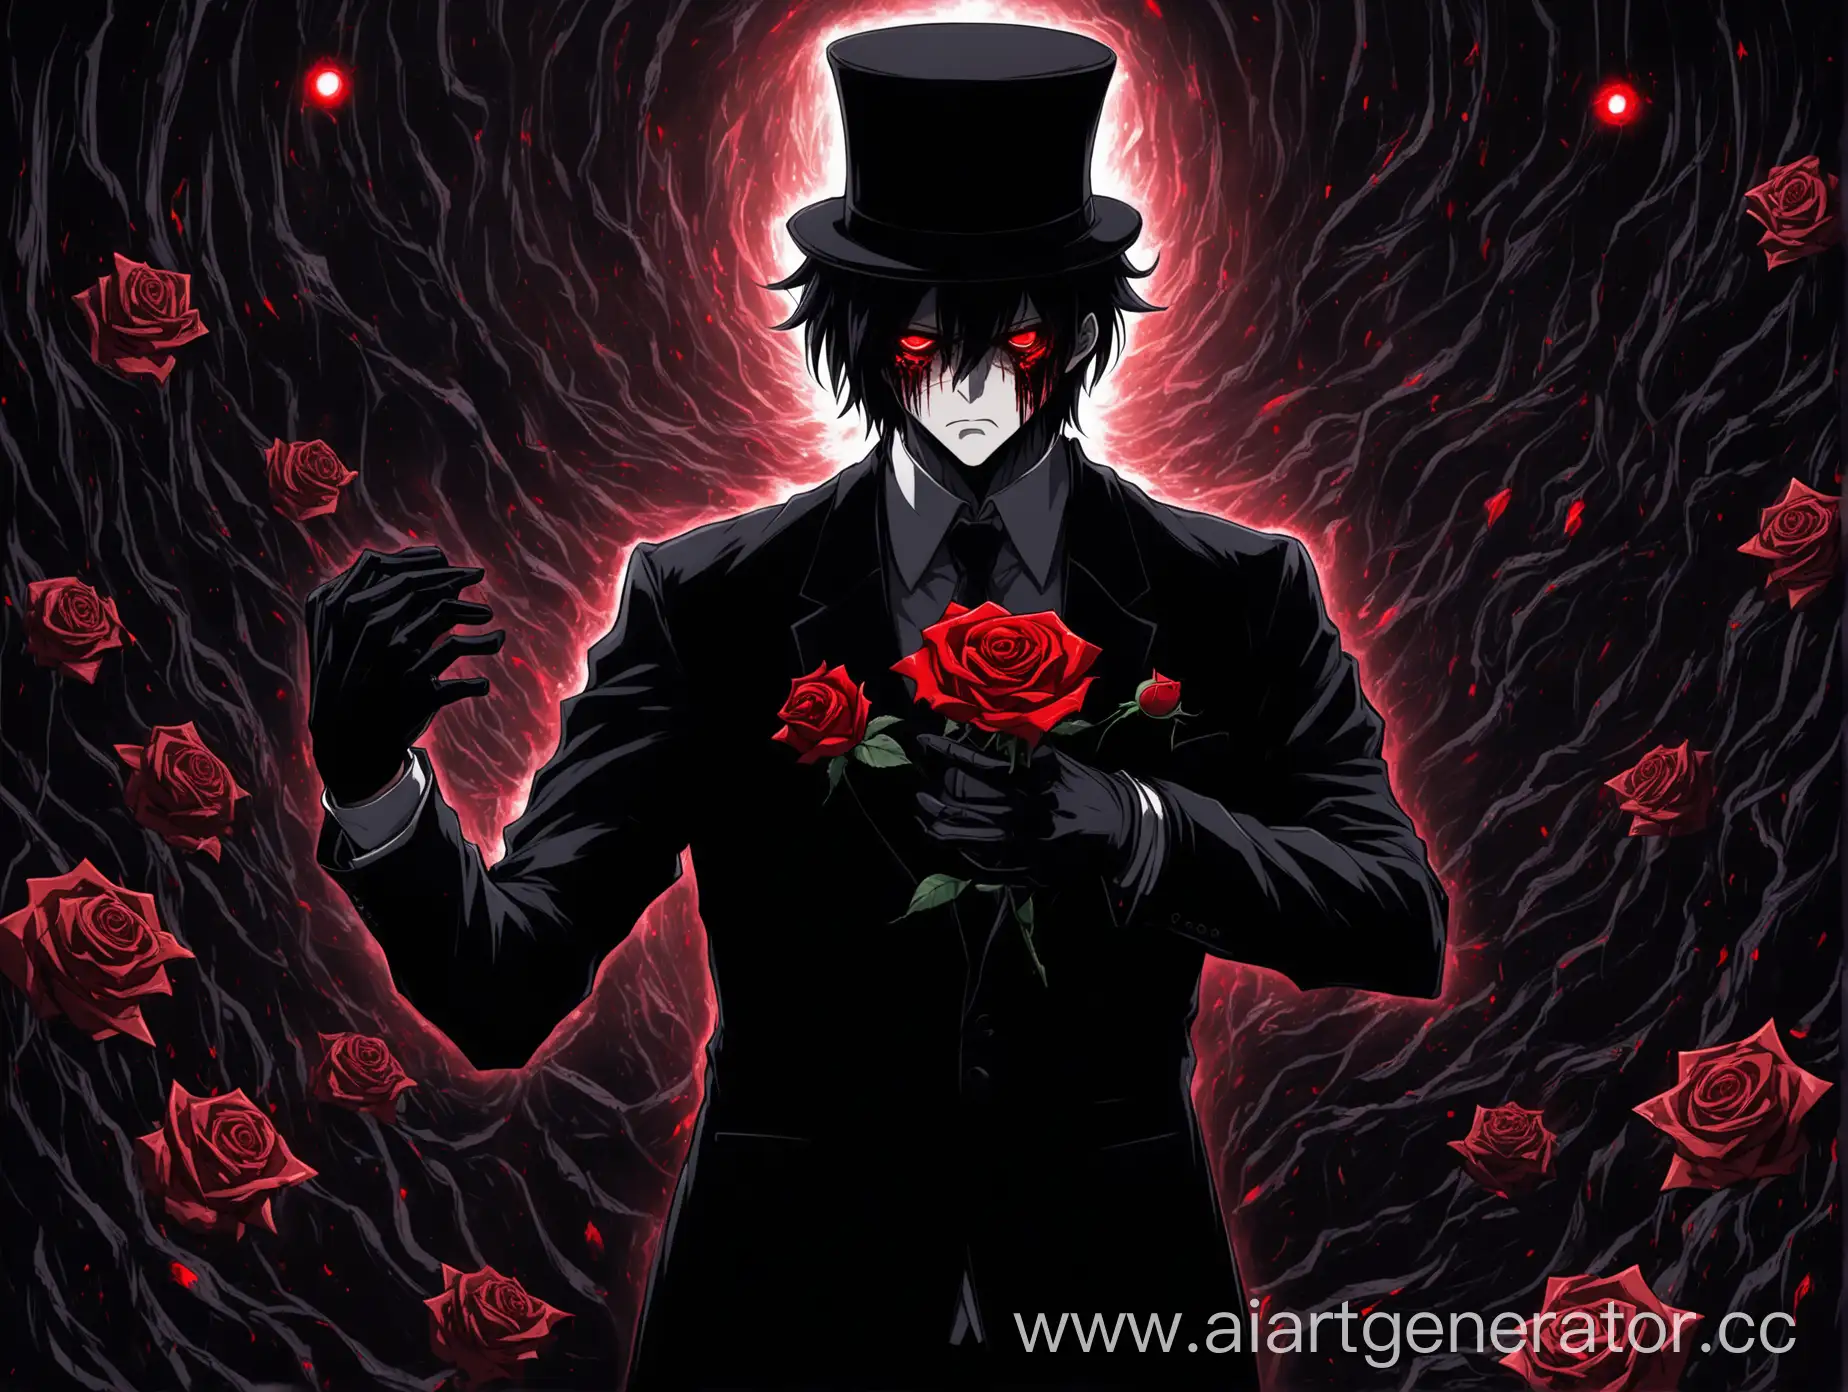 Desperate-Mysterious-Character-Black-Suit-Anime-Style-with-Red-Rose